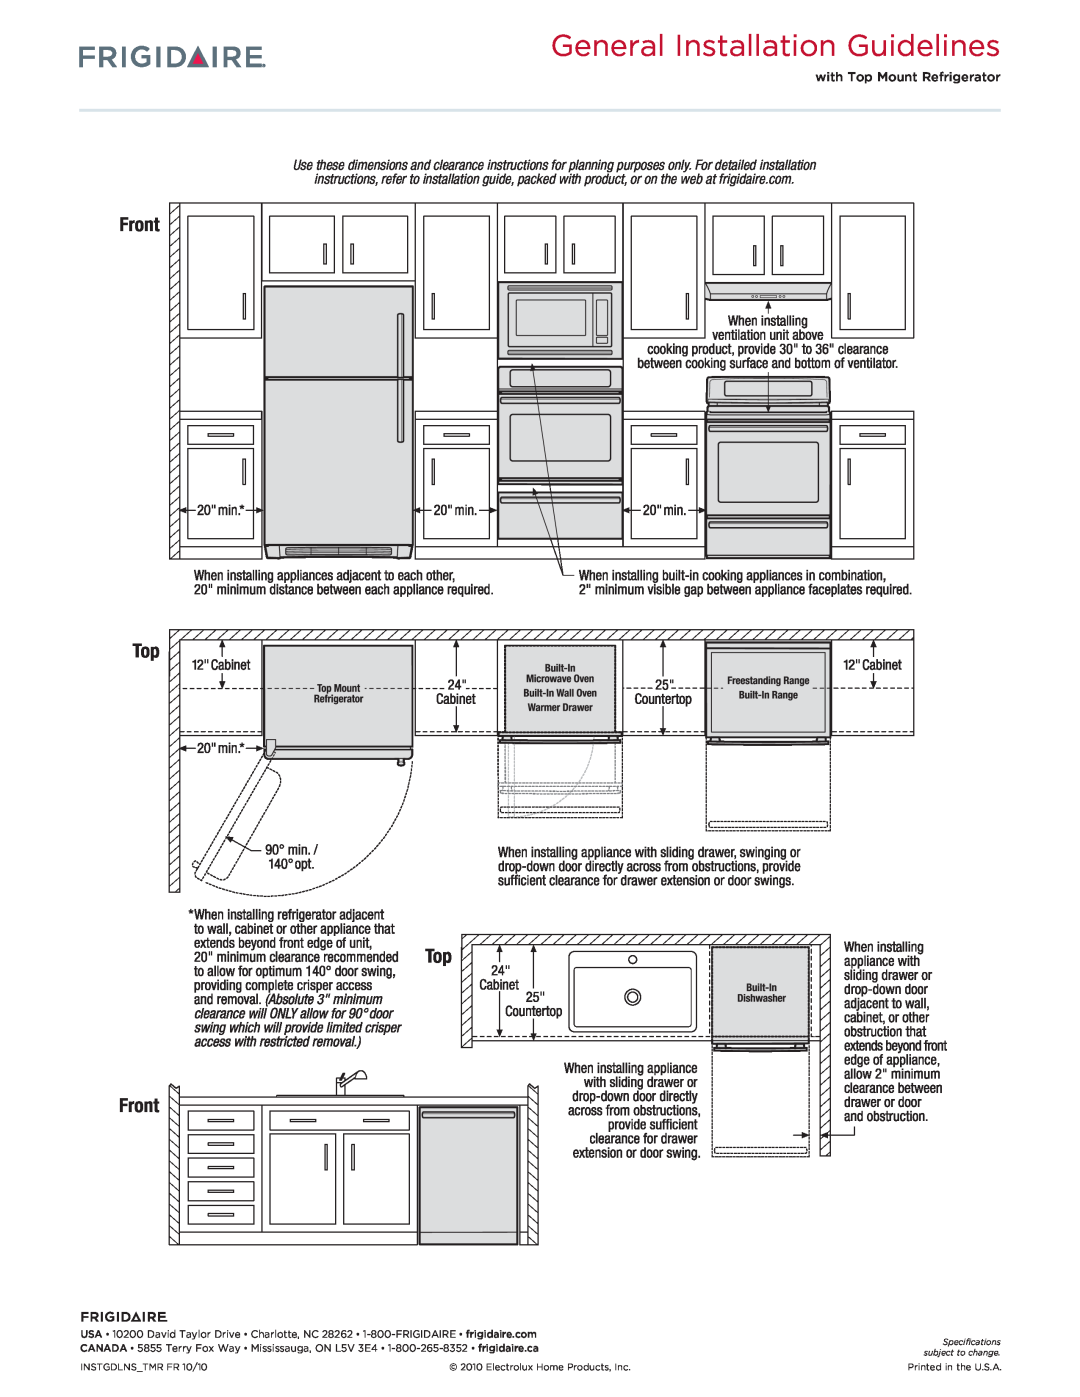 Frigidaire FFMV152CL dimensions General Installation Guidelines, Top Front, with Top Mount Refrigerator 